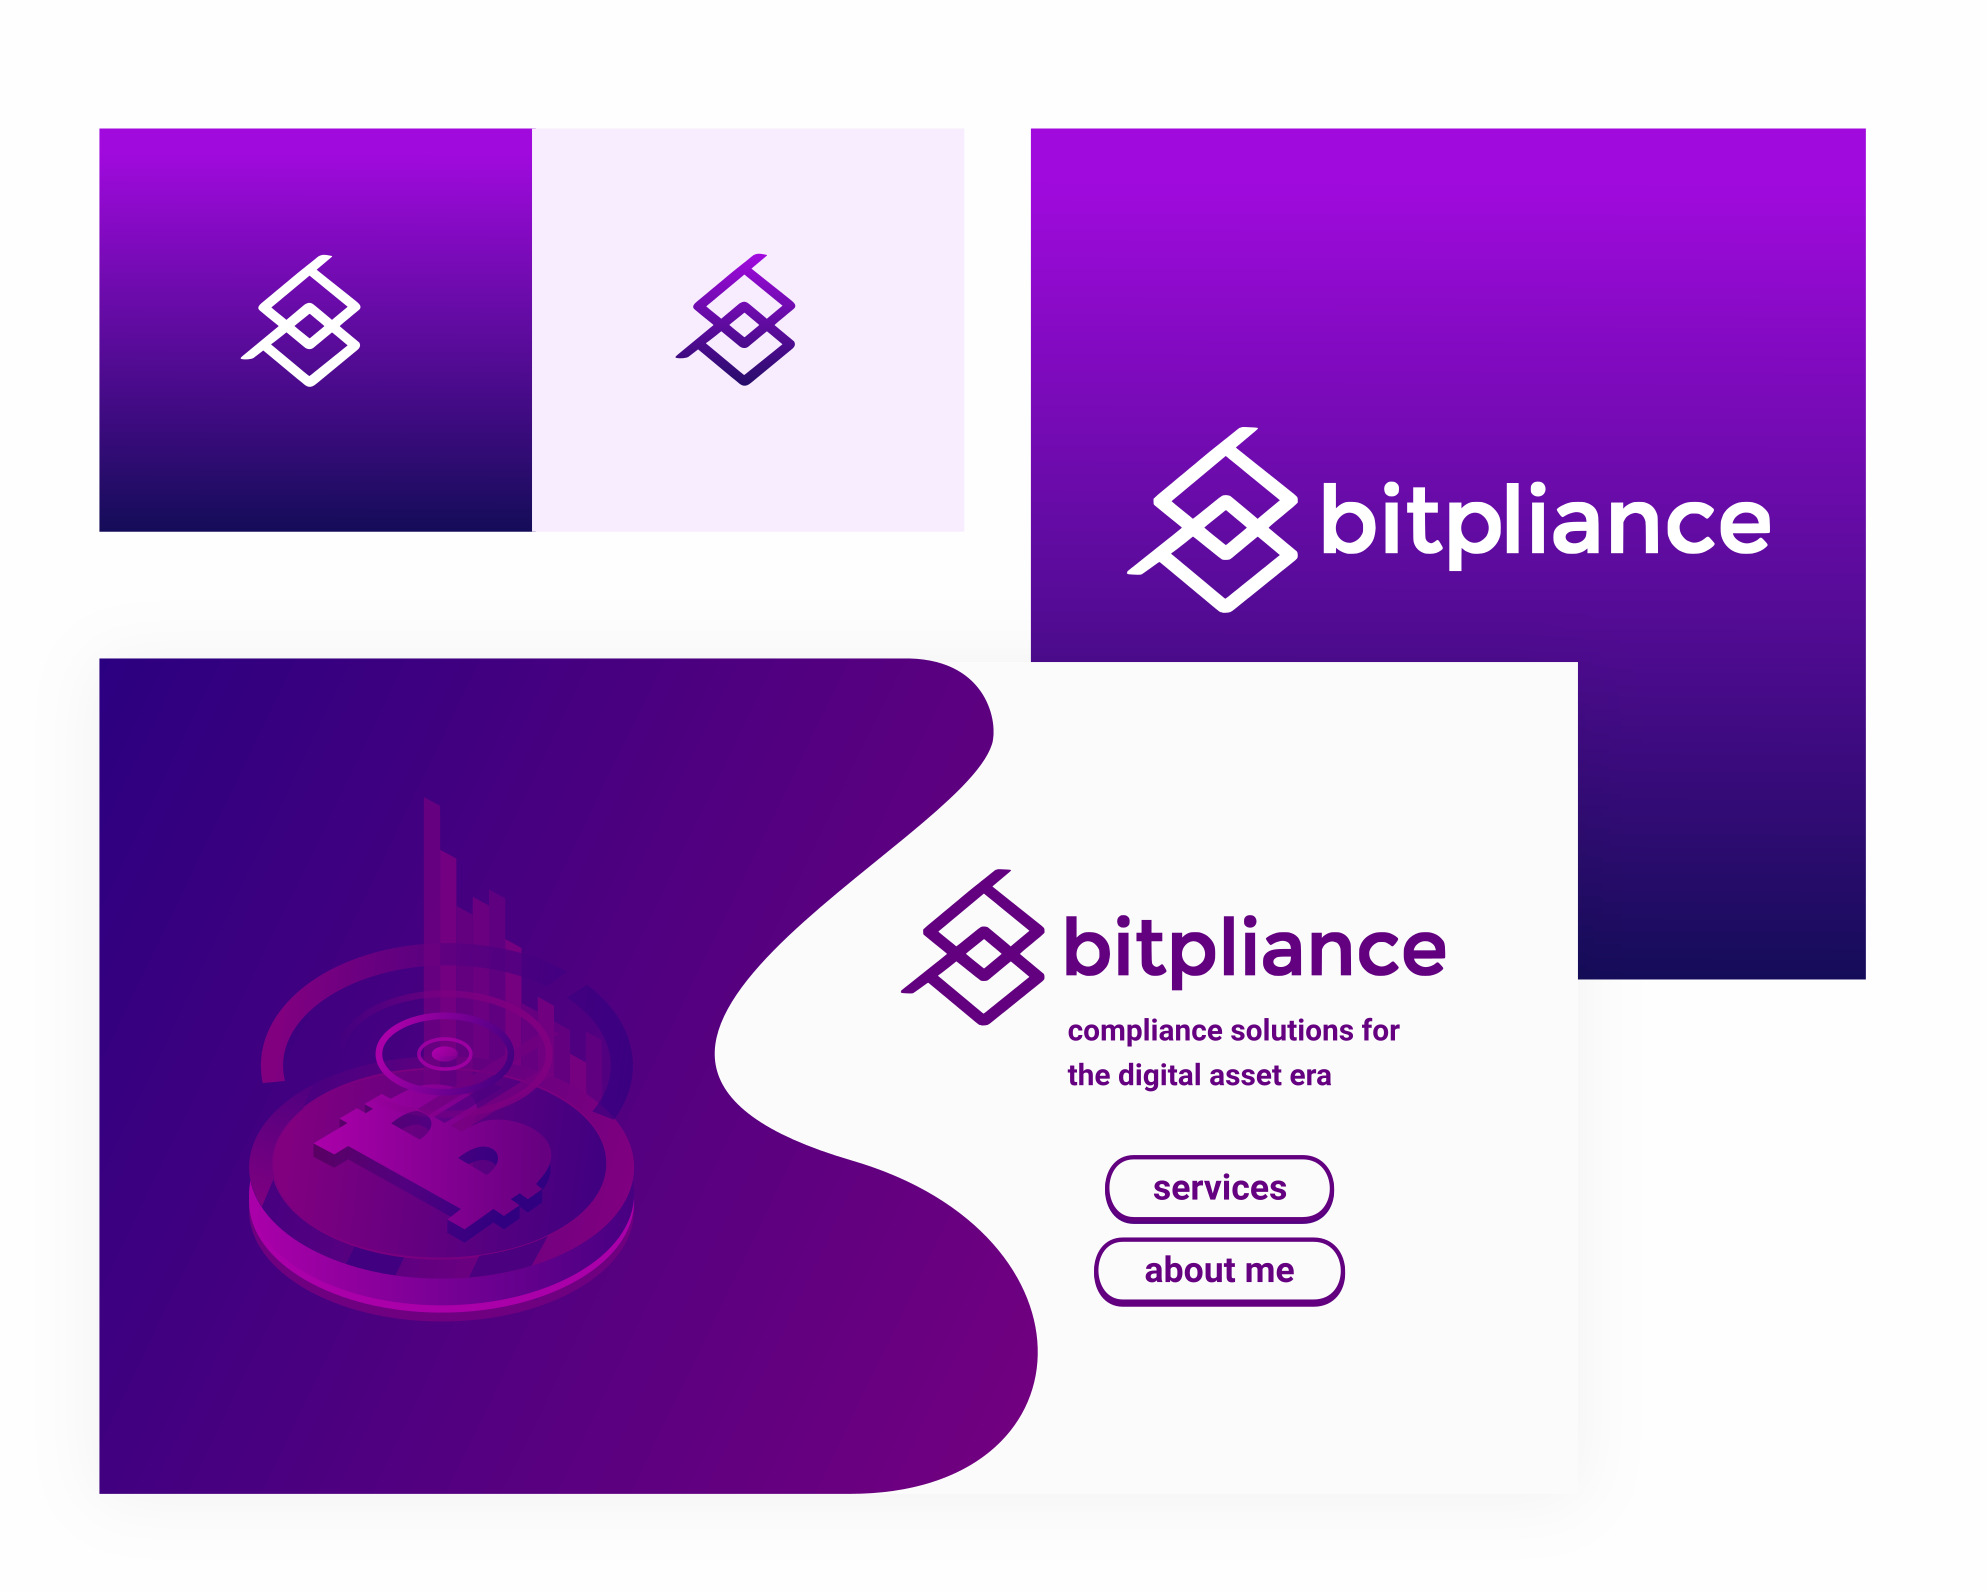 Logo and landing page design for Bitpliance. Designed by Johnery